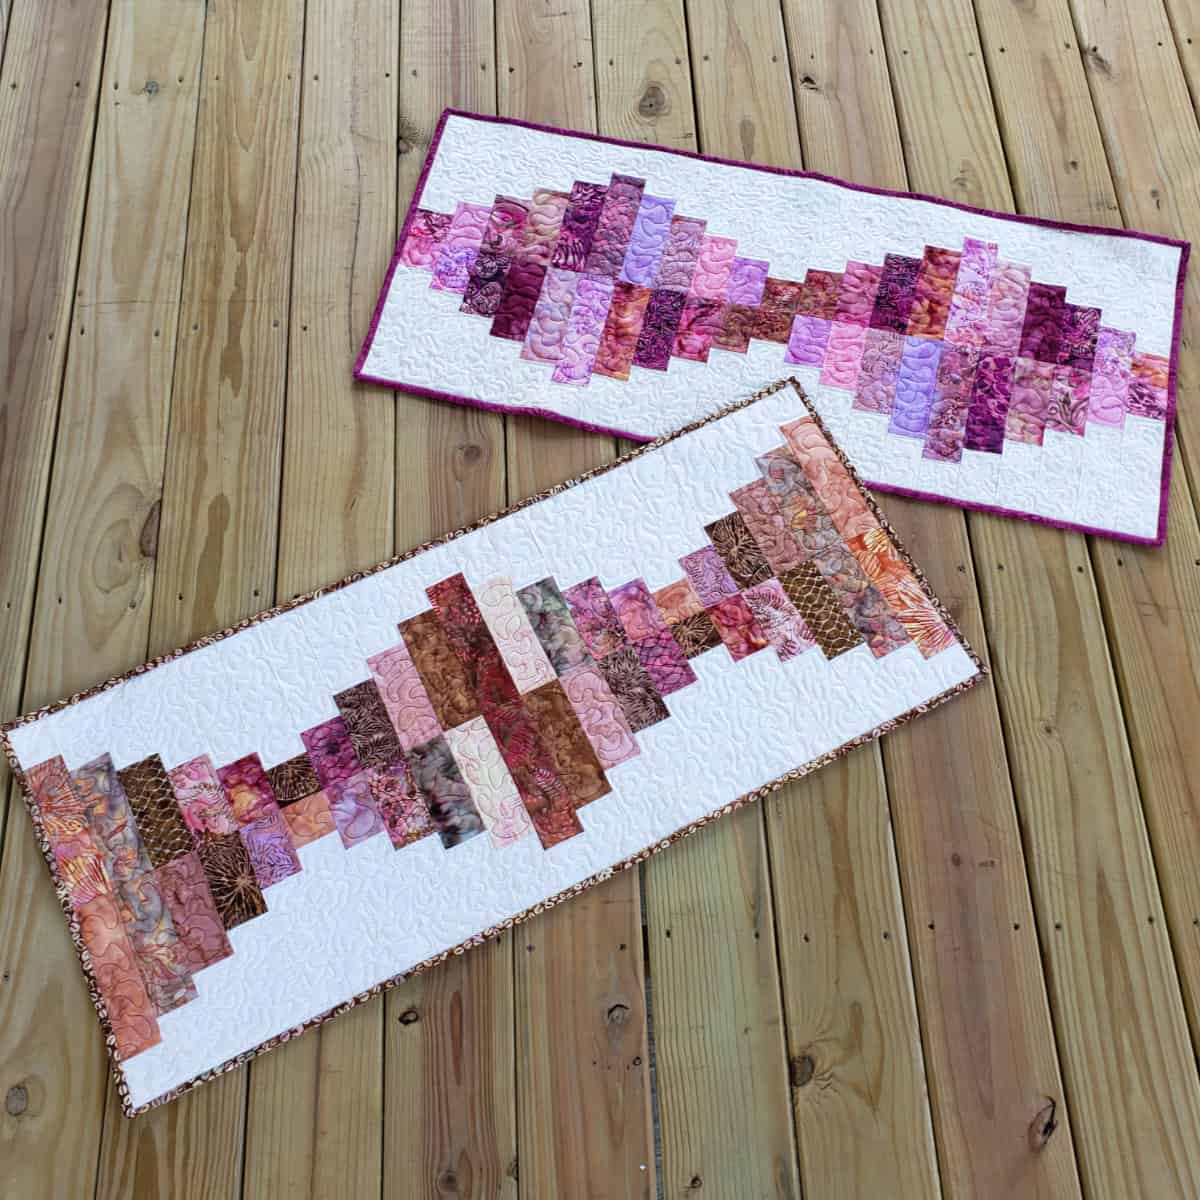 Piano Keys Table Runner in 2 different colors